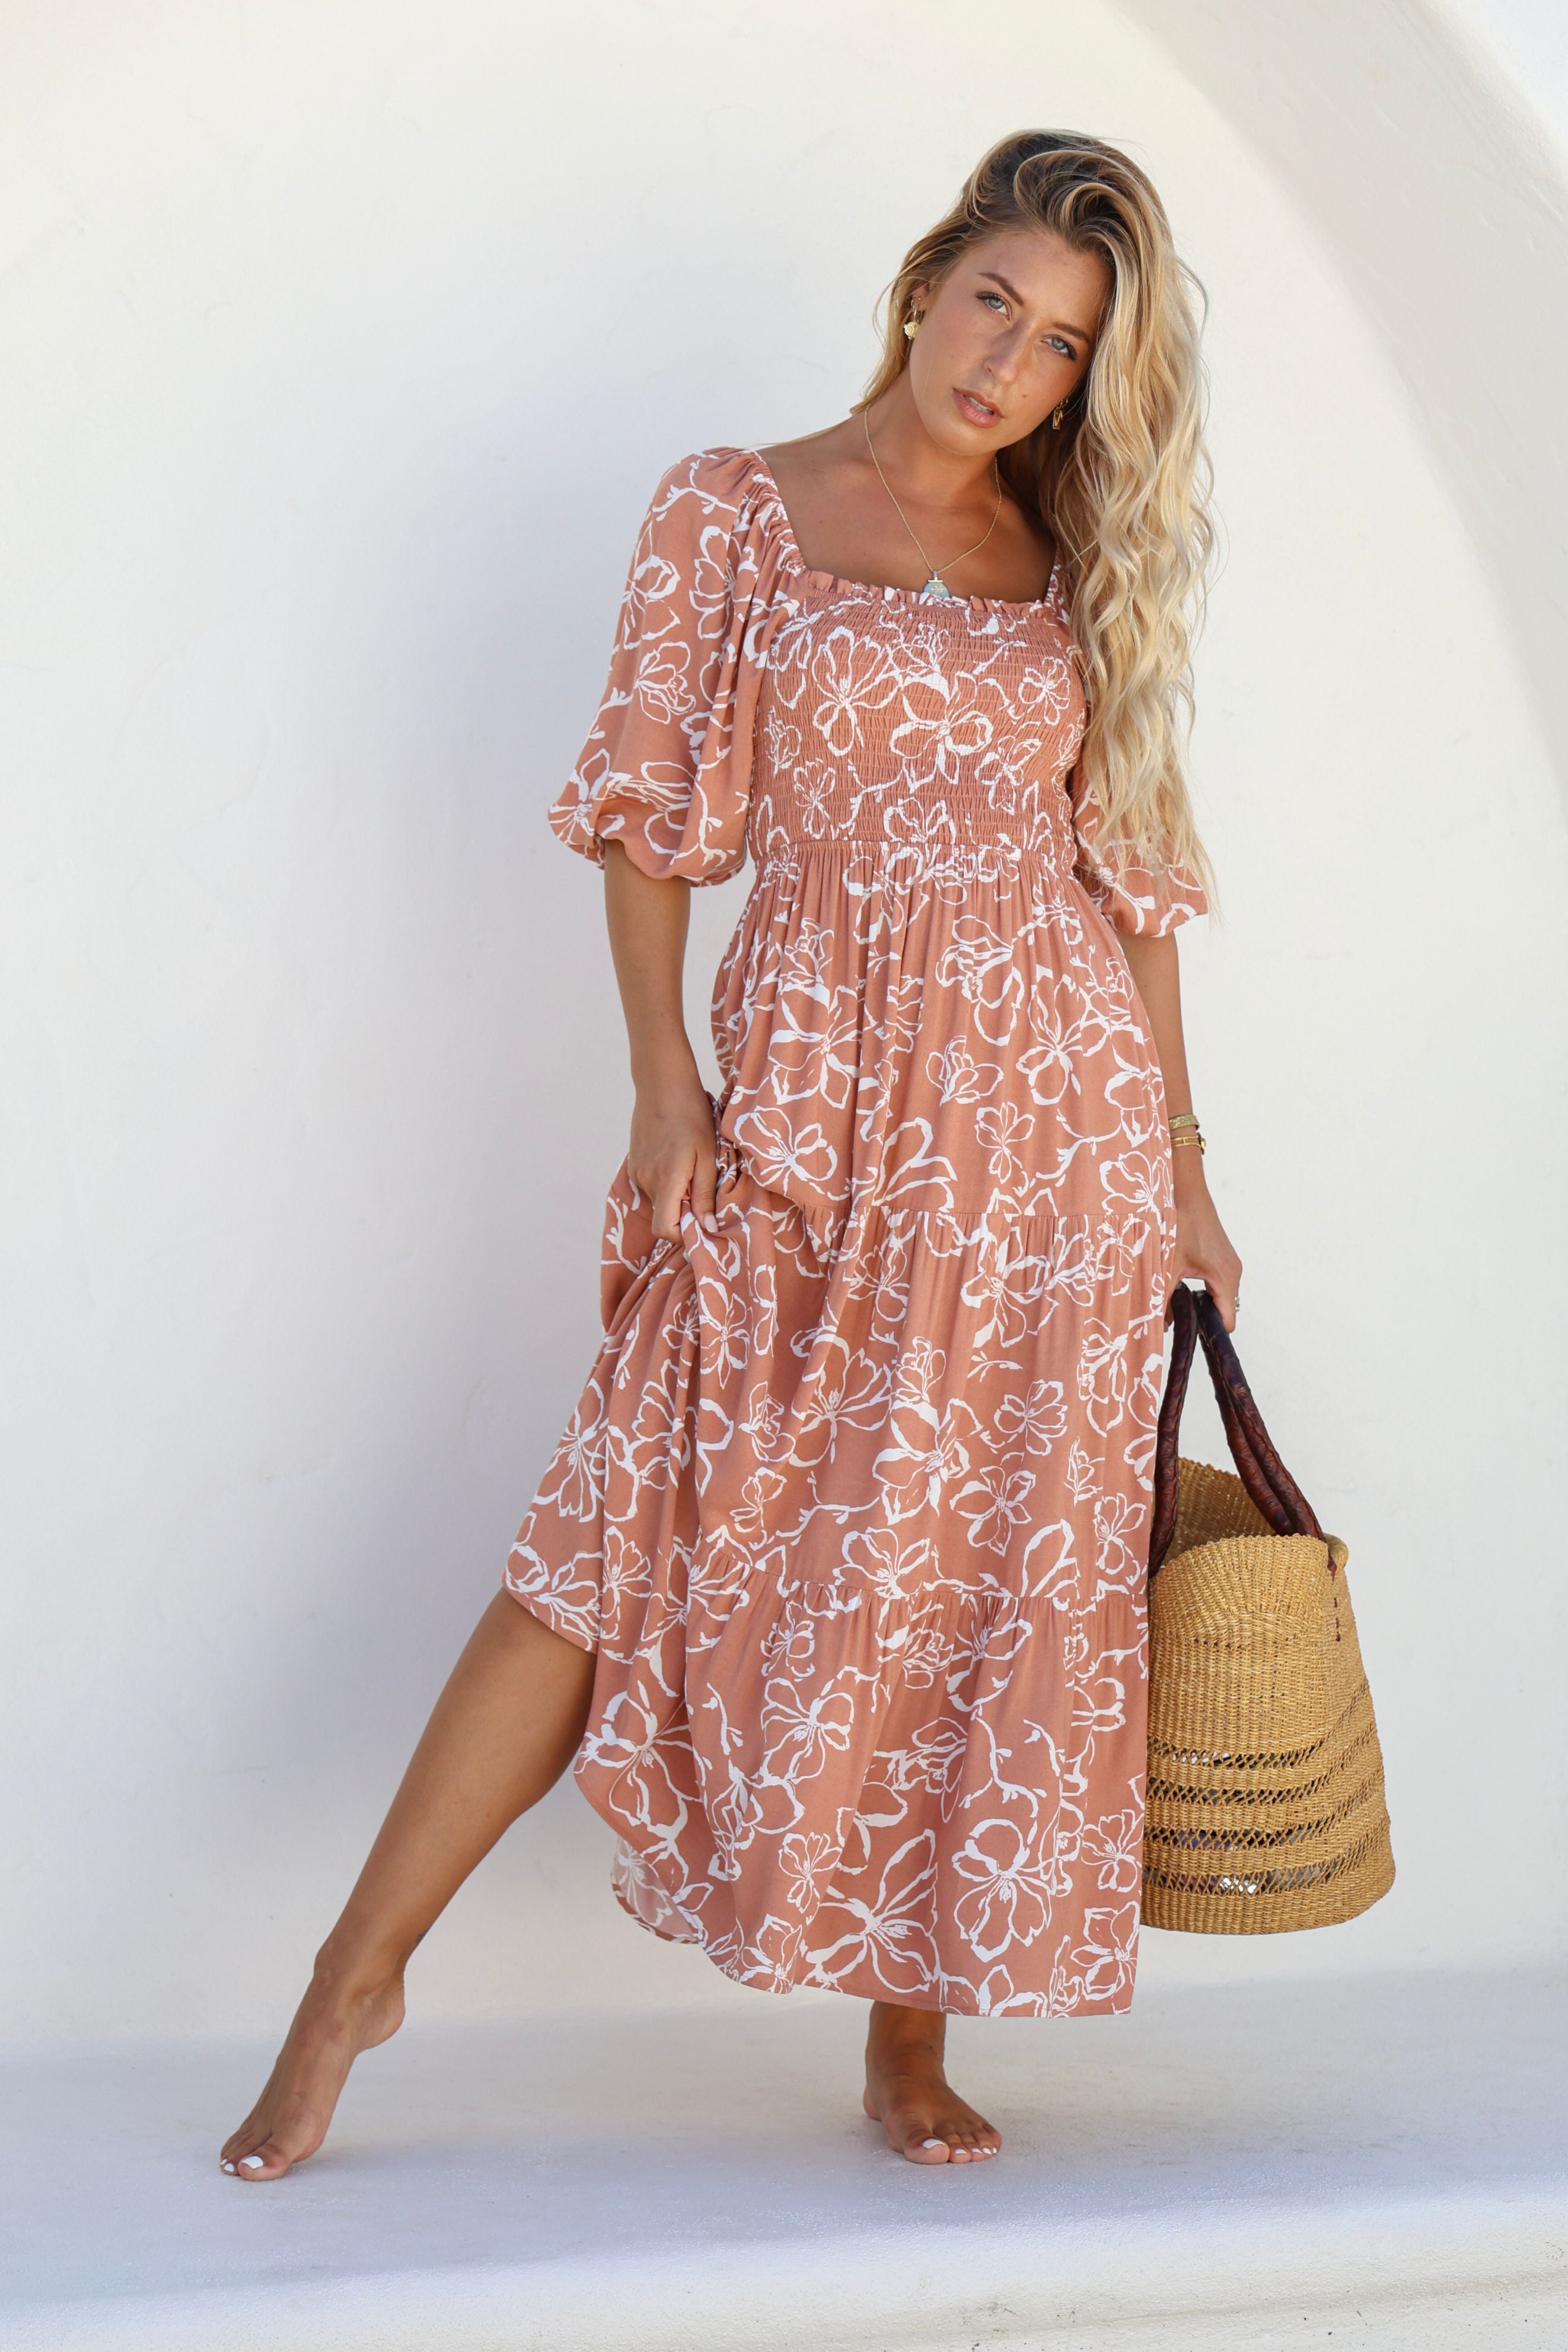 Morocco Maxi Dress in Tan and White